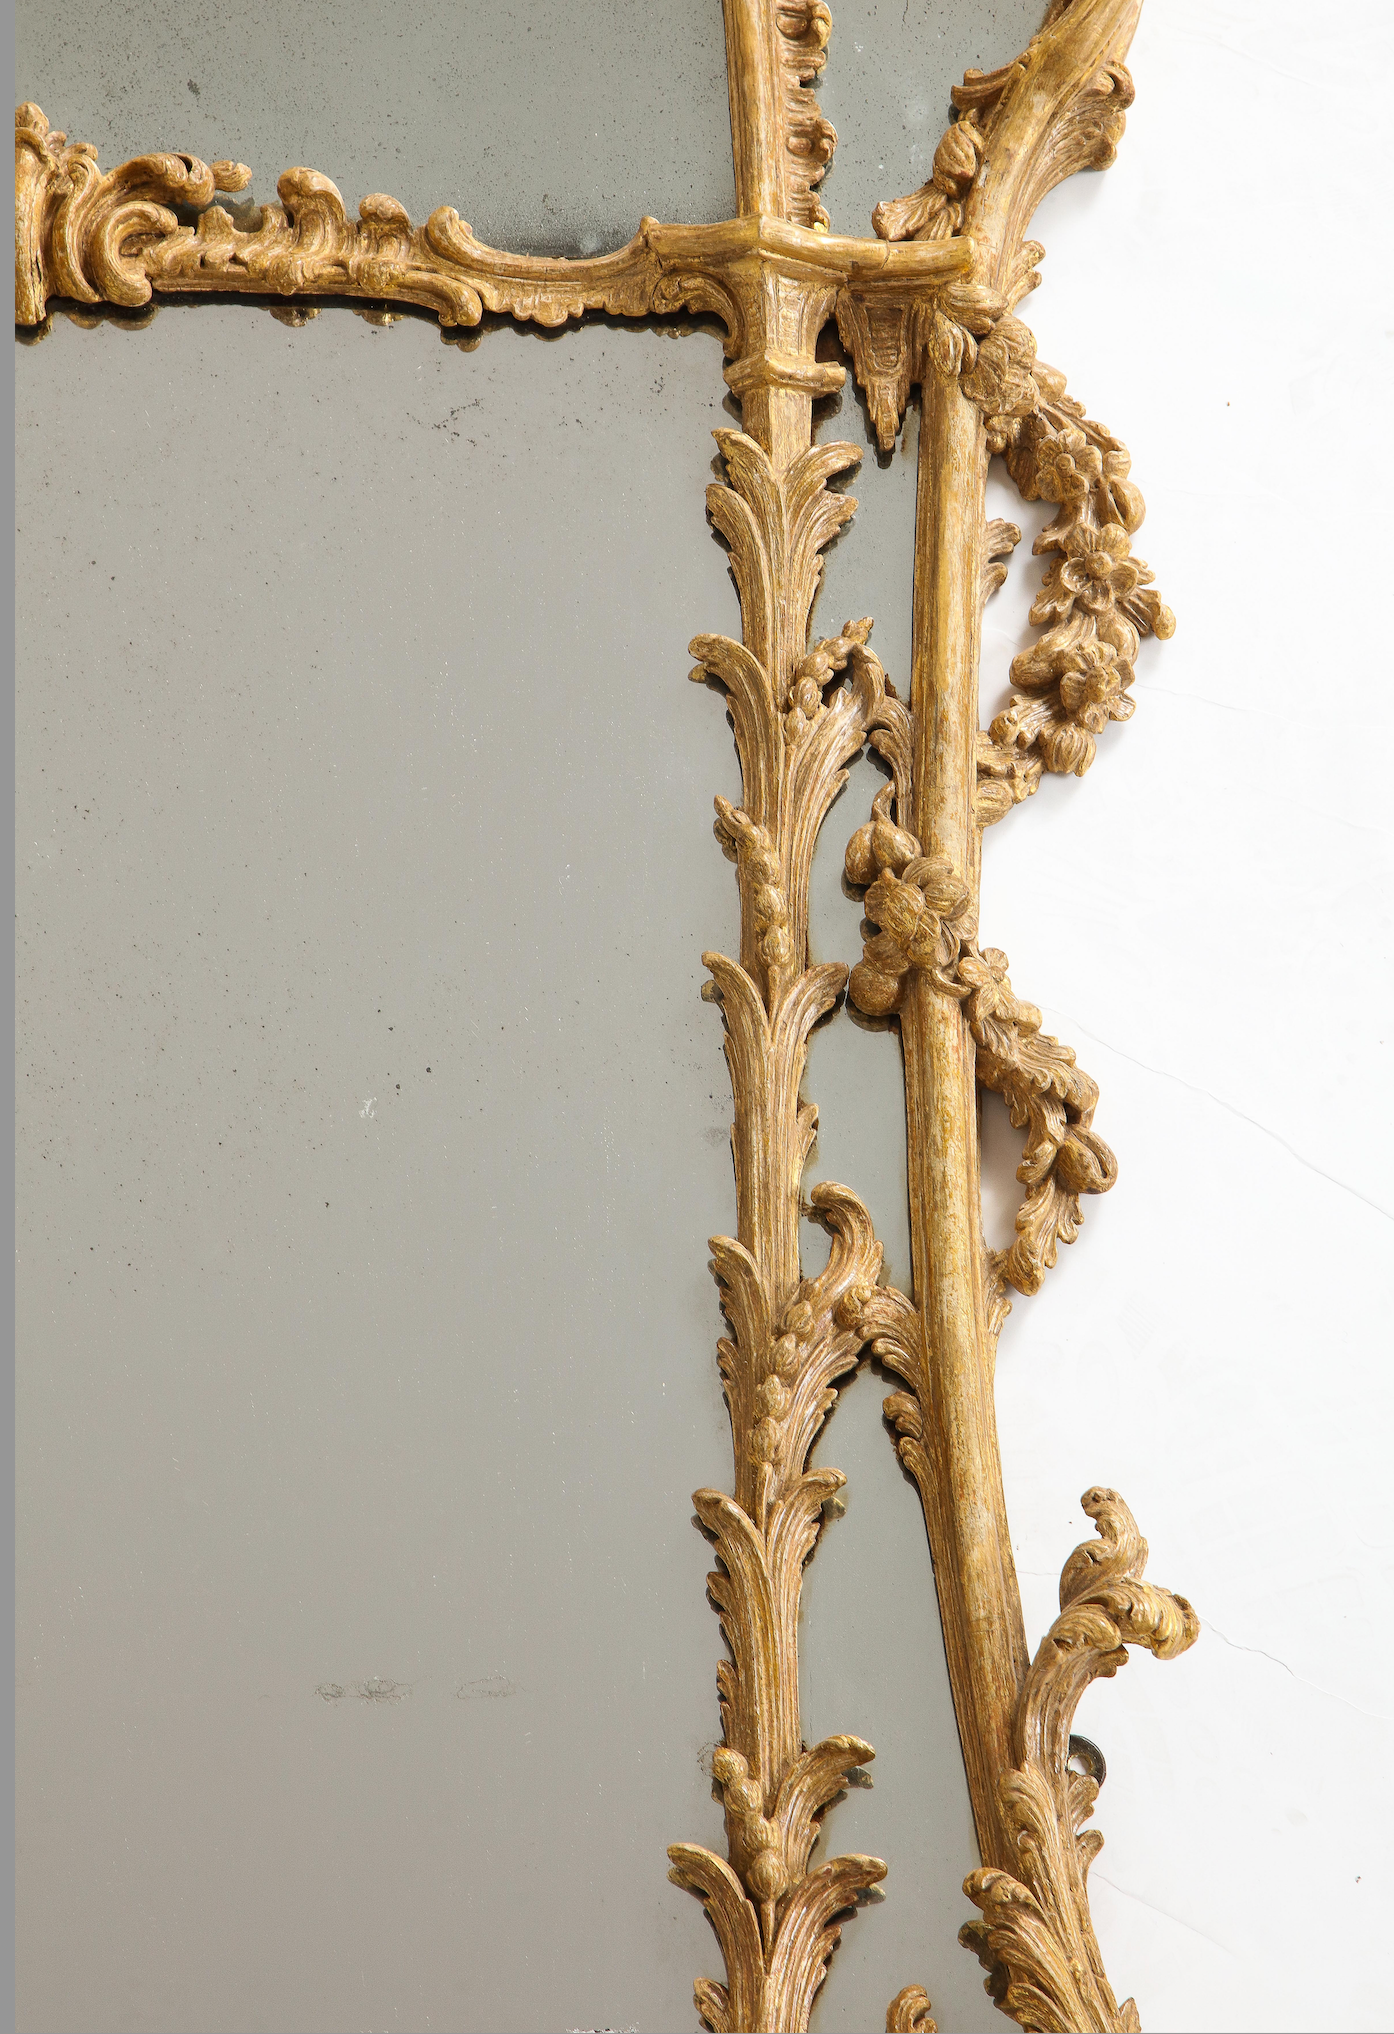 Rococo Carved Gilt Mirror in the Manner of Chippendale